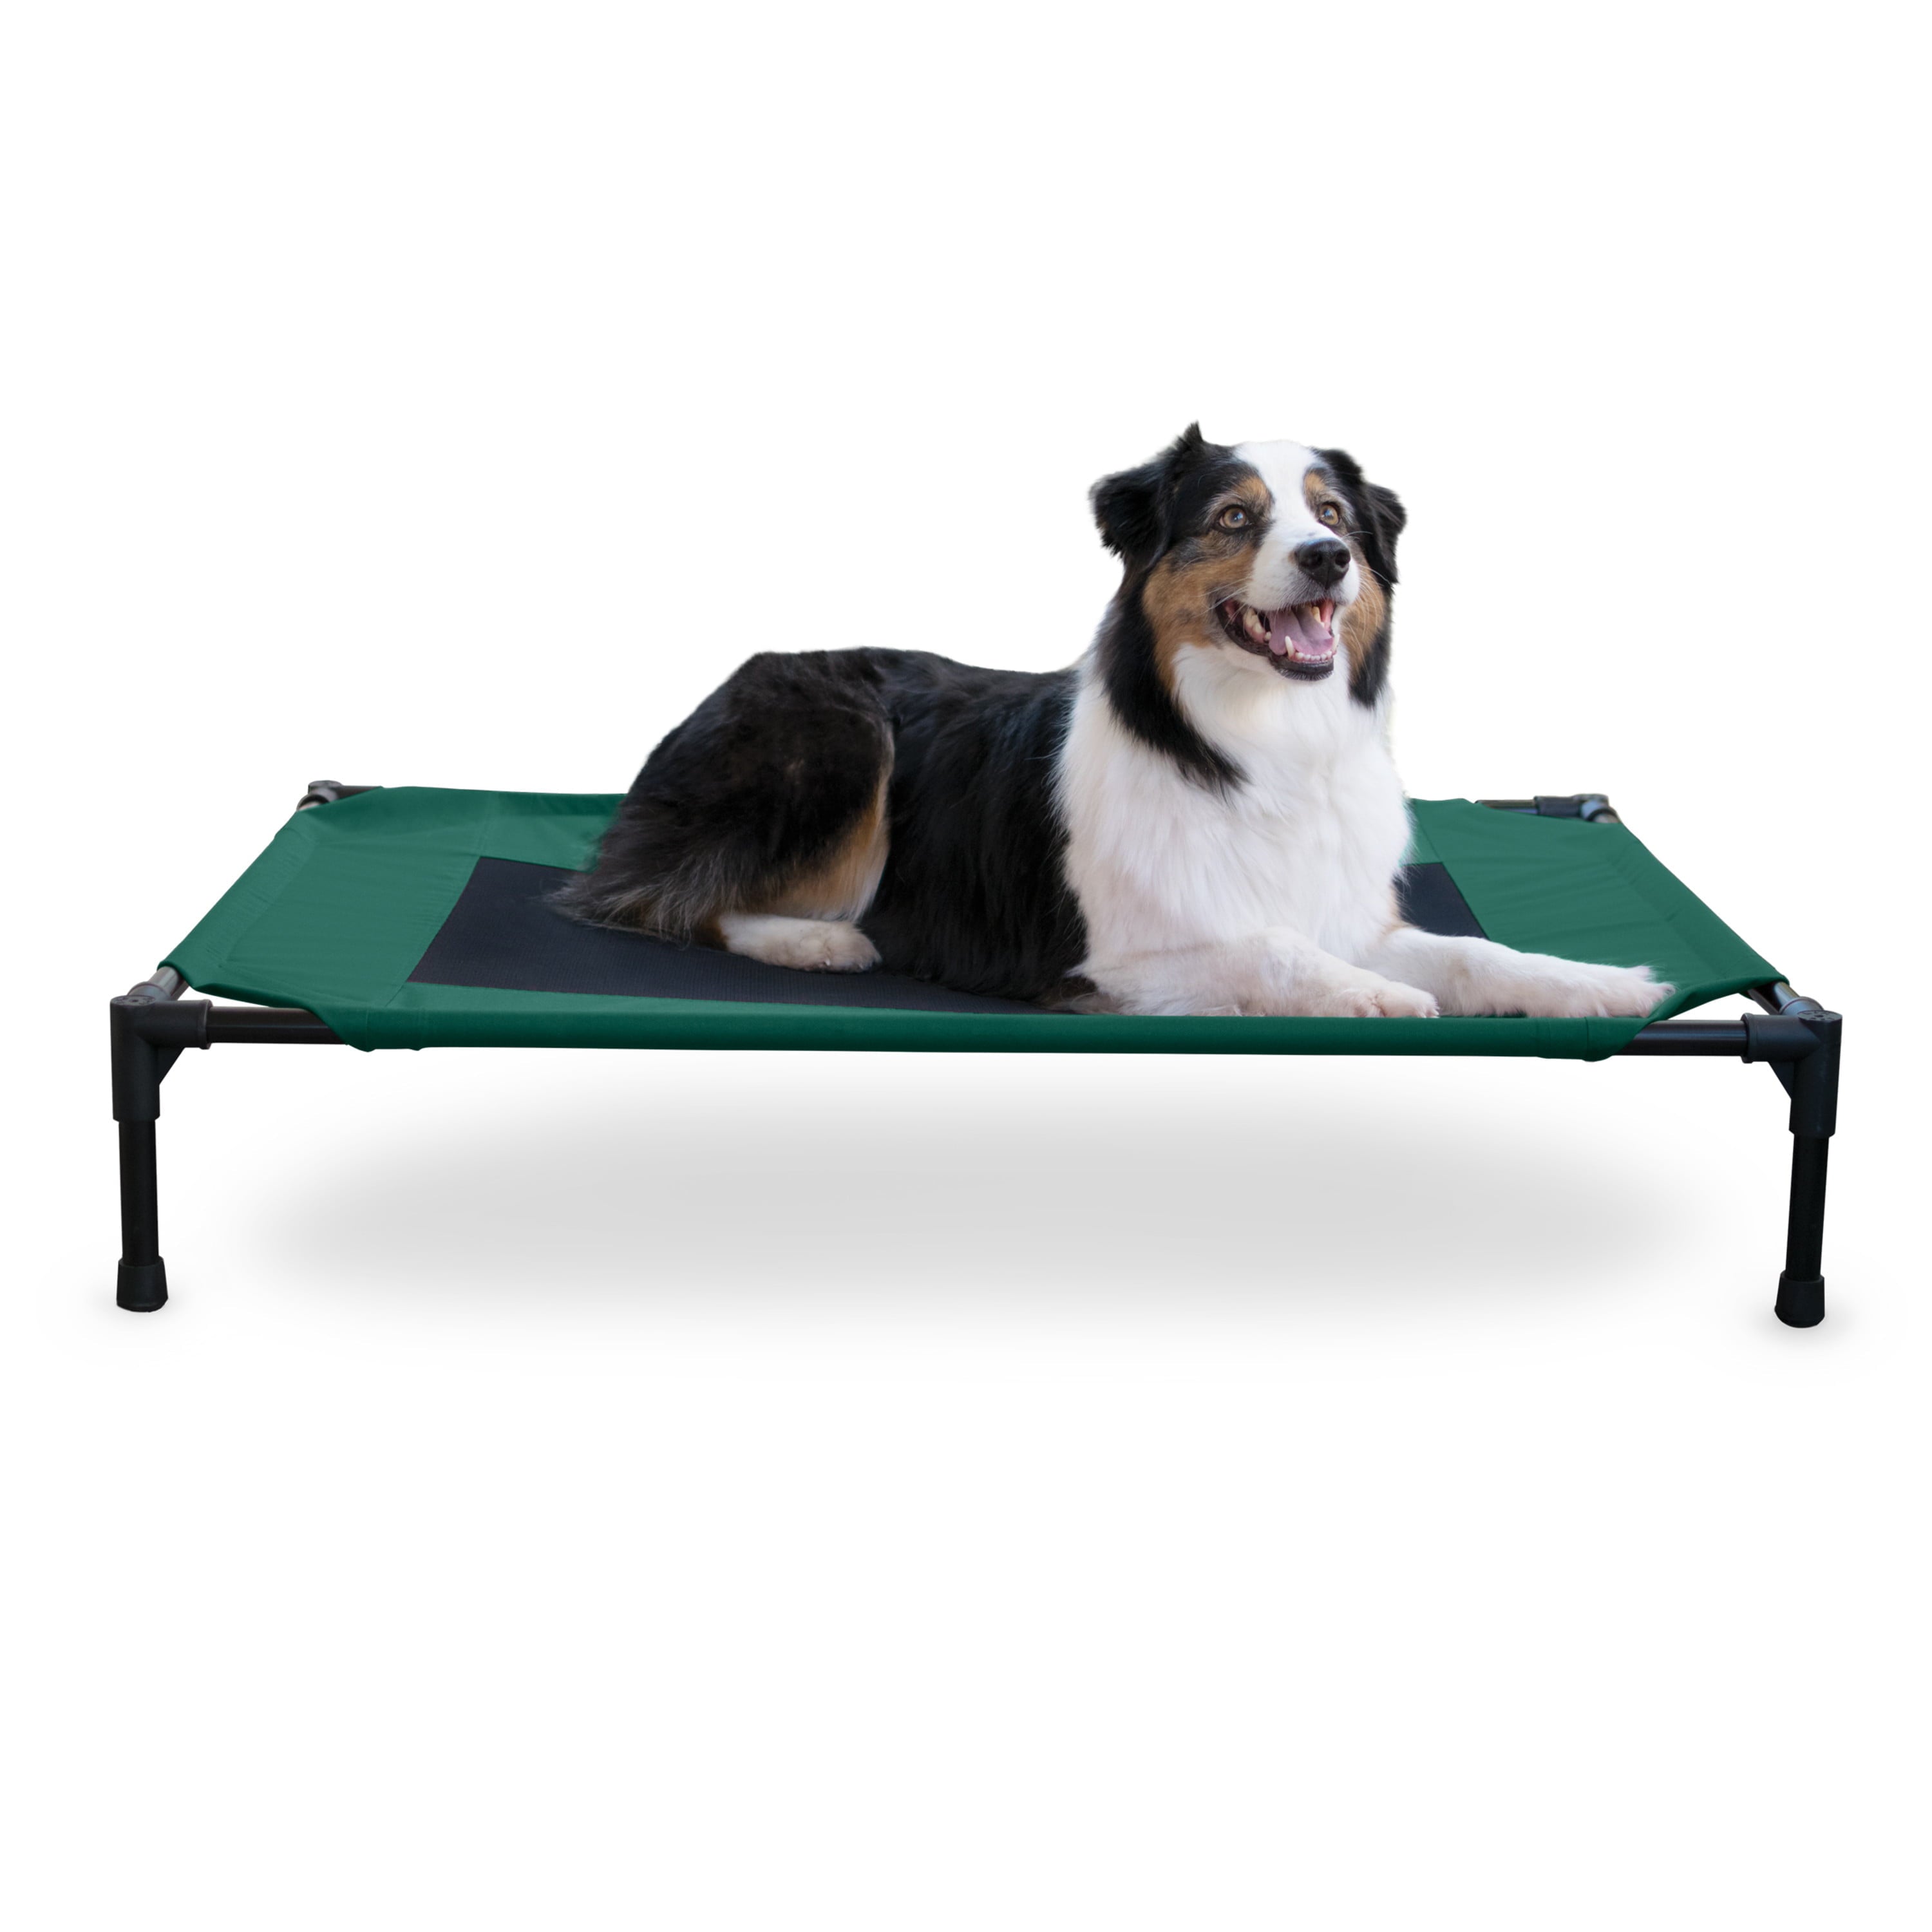 KandH Pet Products Original Pet Cot Elevated Dog Bed Green/Black Large 30 X 42 X 7 Inches